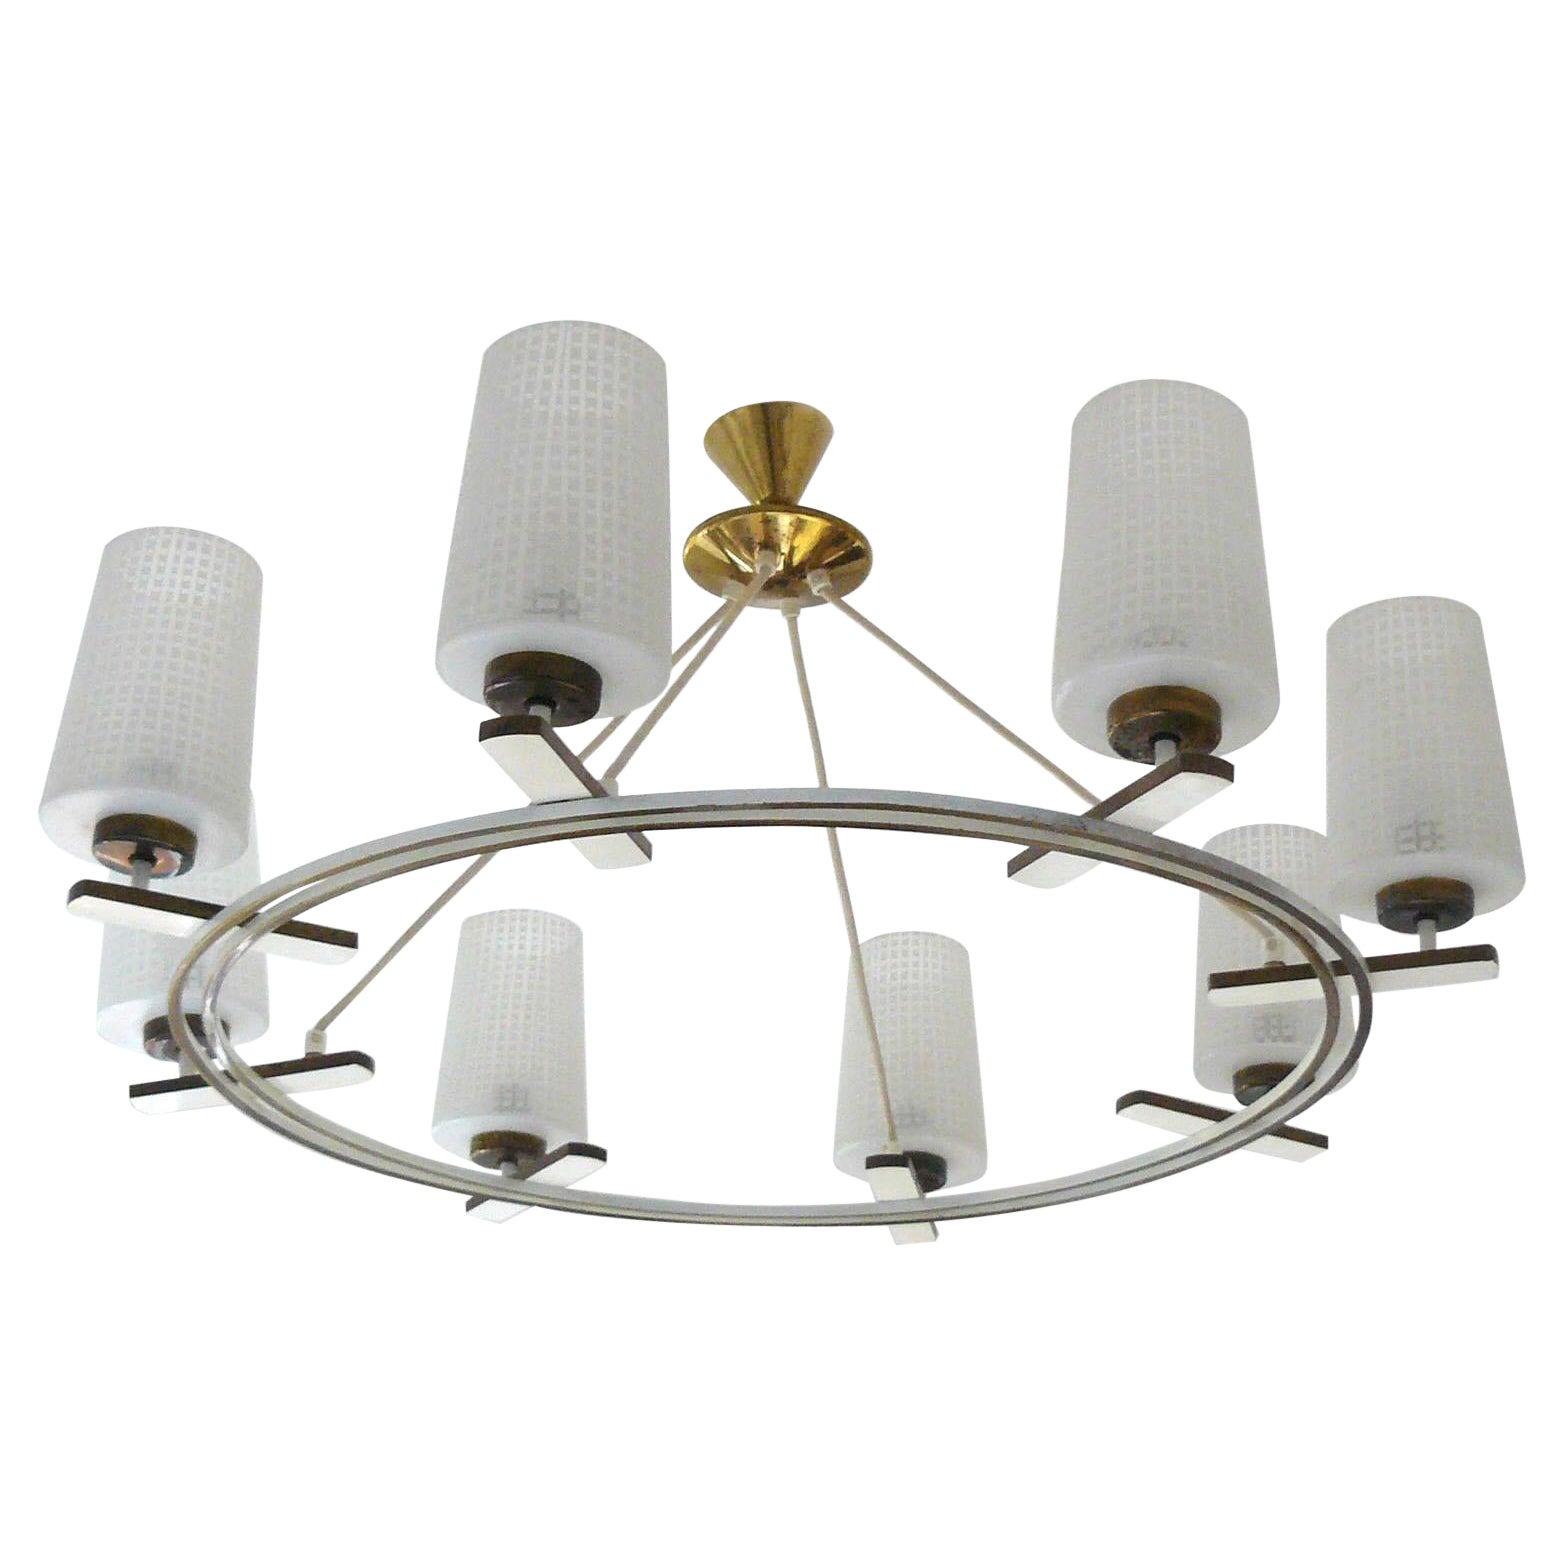 Large chandelier with clean lines has a brass circular frame that is partly painted cream, Austria 1950's. It holds 8 textures opalescent frosted shades, etched with a square pattern. The cylinder glass shades radiate from the brass and cream metal